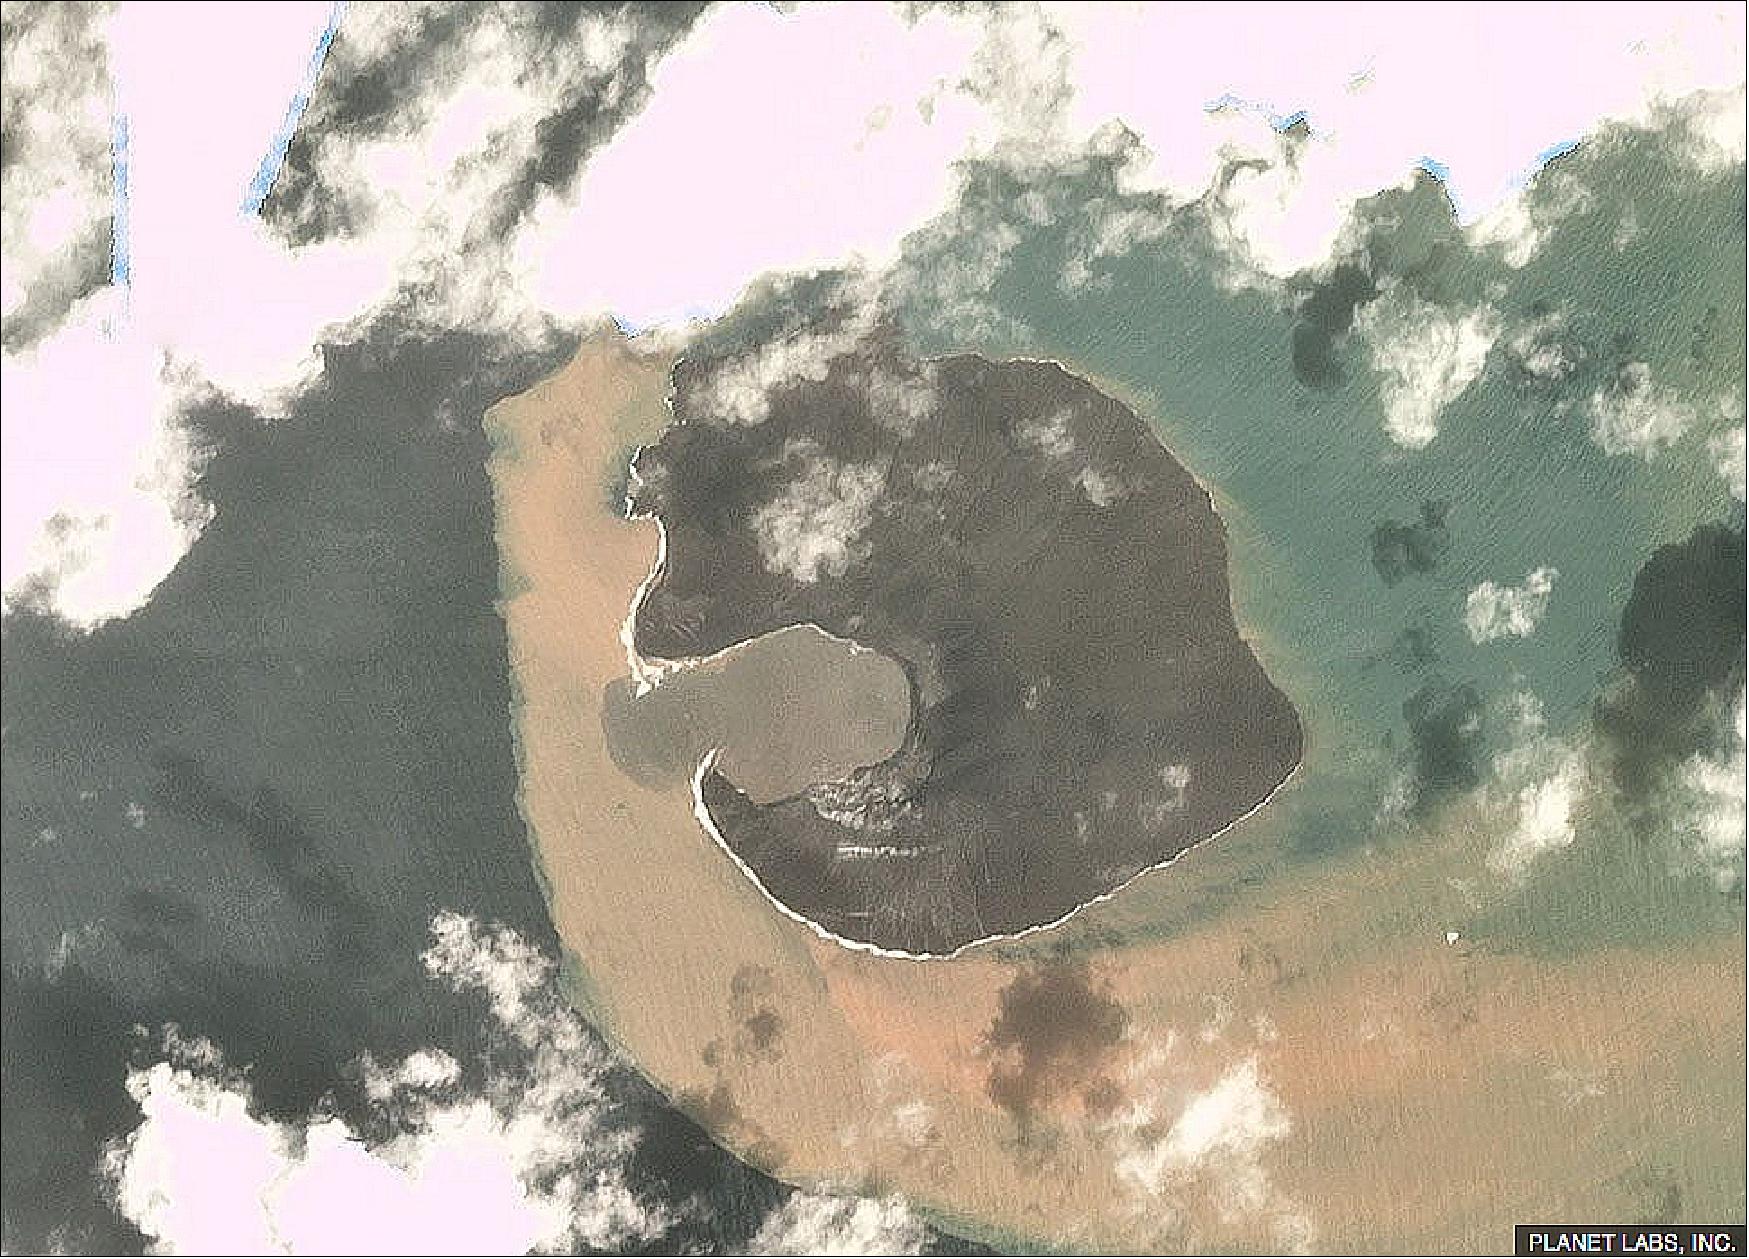 Figure 27: After the event: One of Planet's Doves observes the scene a week after the disaster on 30 December 2018 (image credit: Planet Labs Inc.)